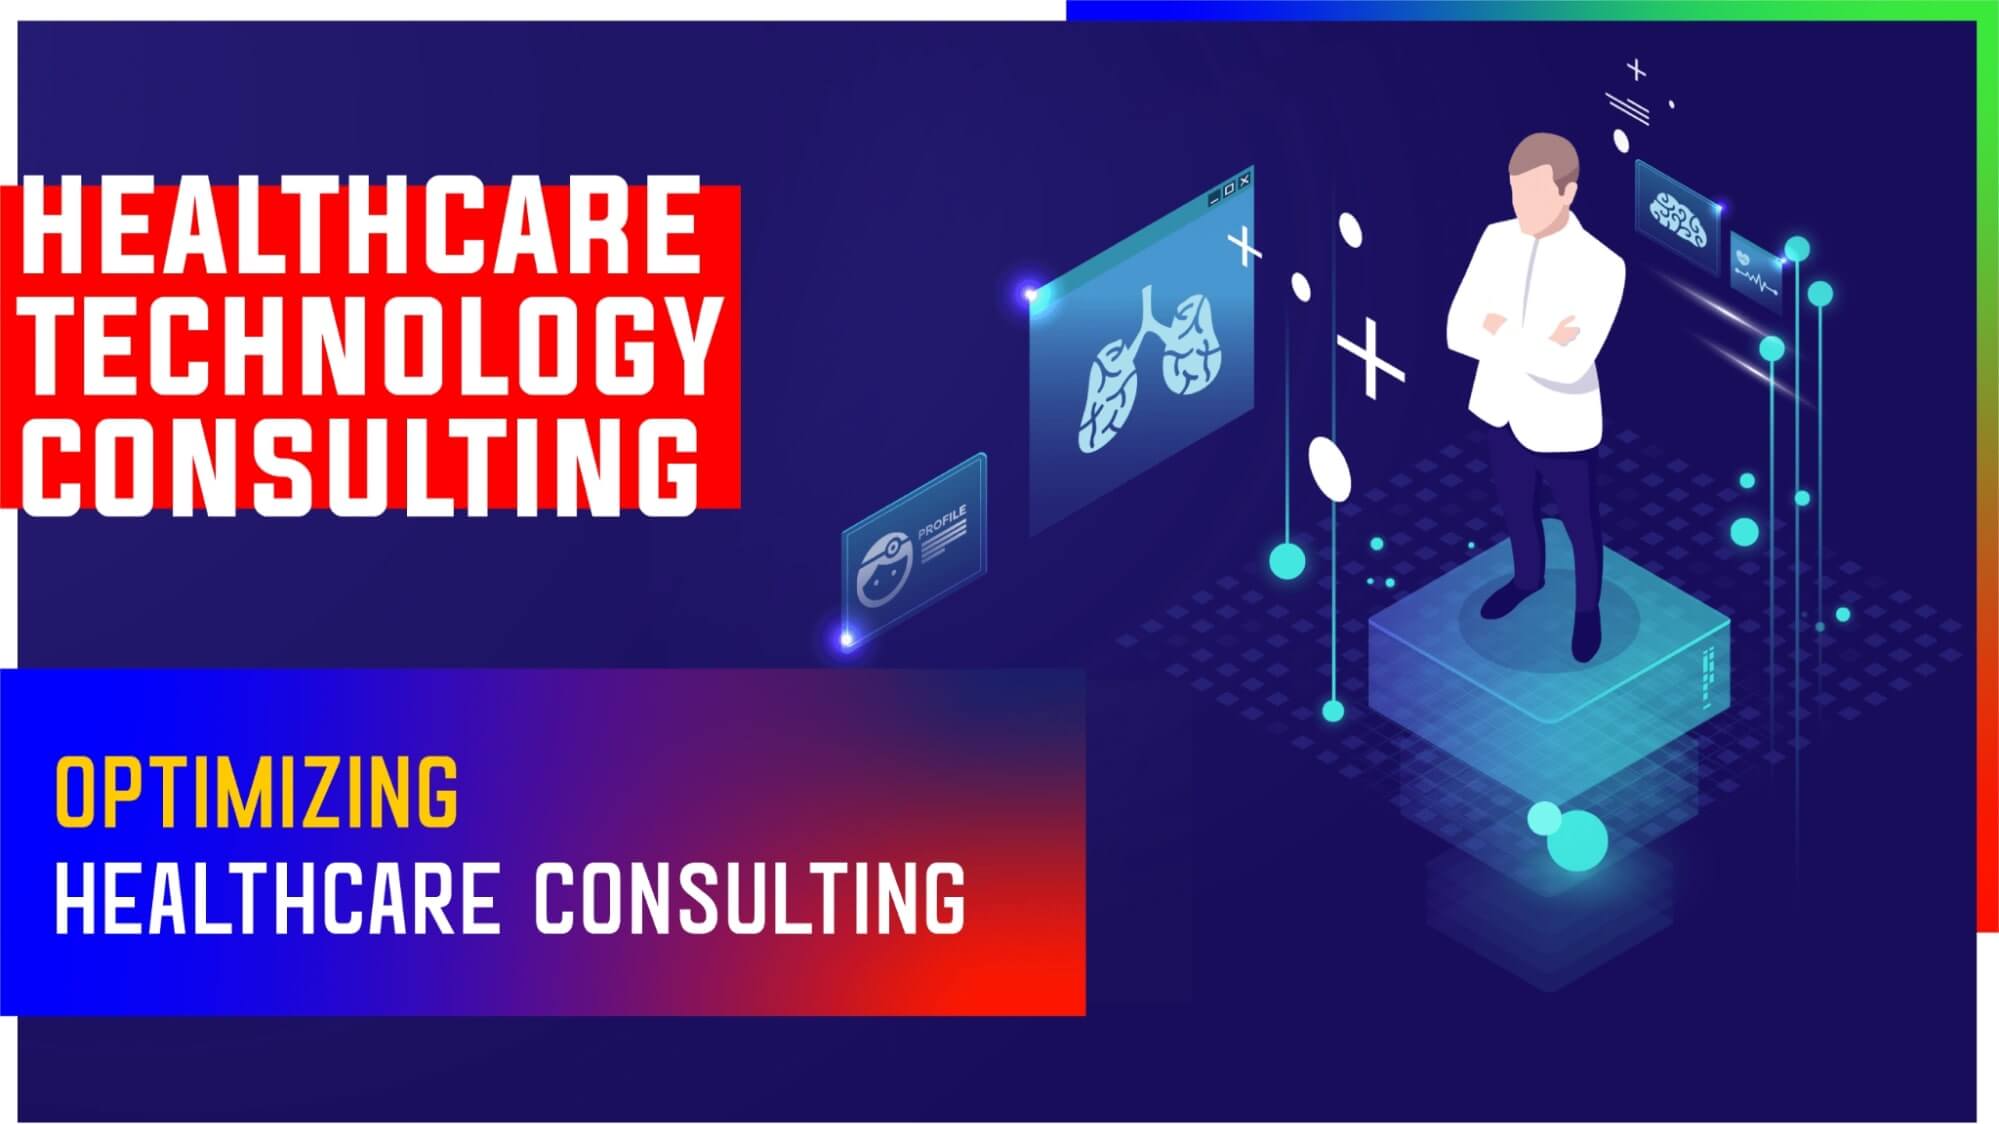 Healthcare Technology Consulting